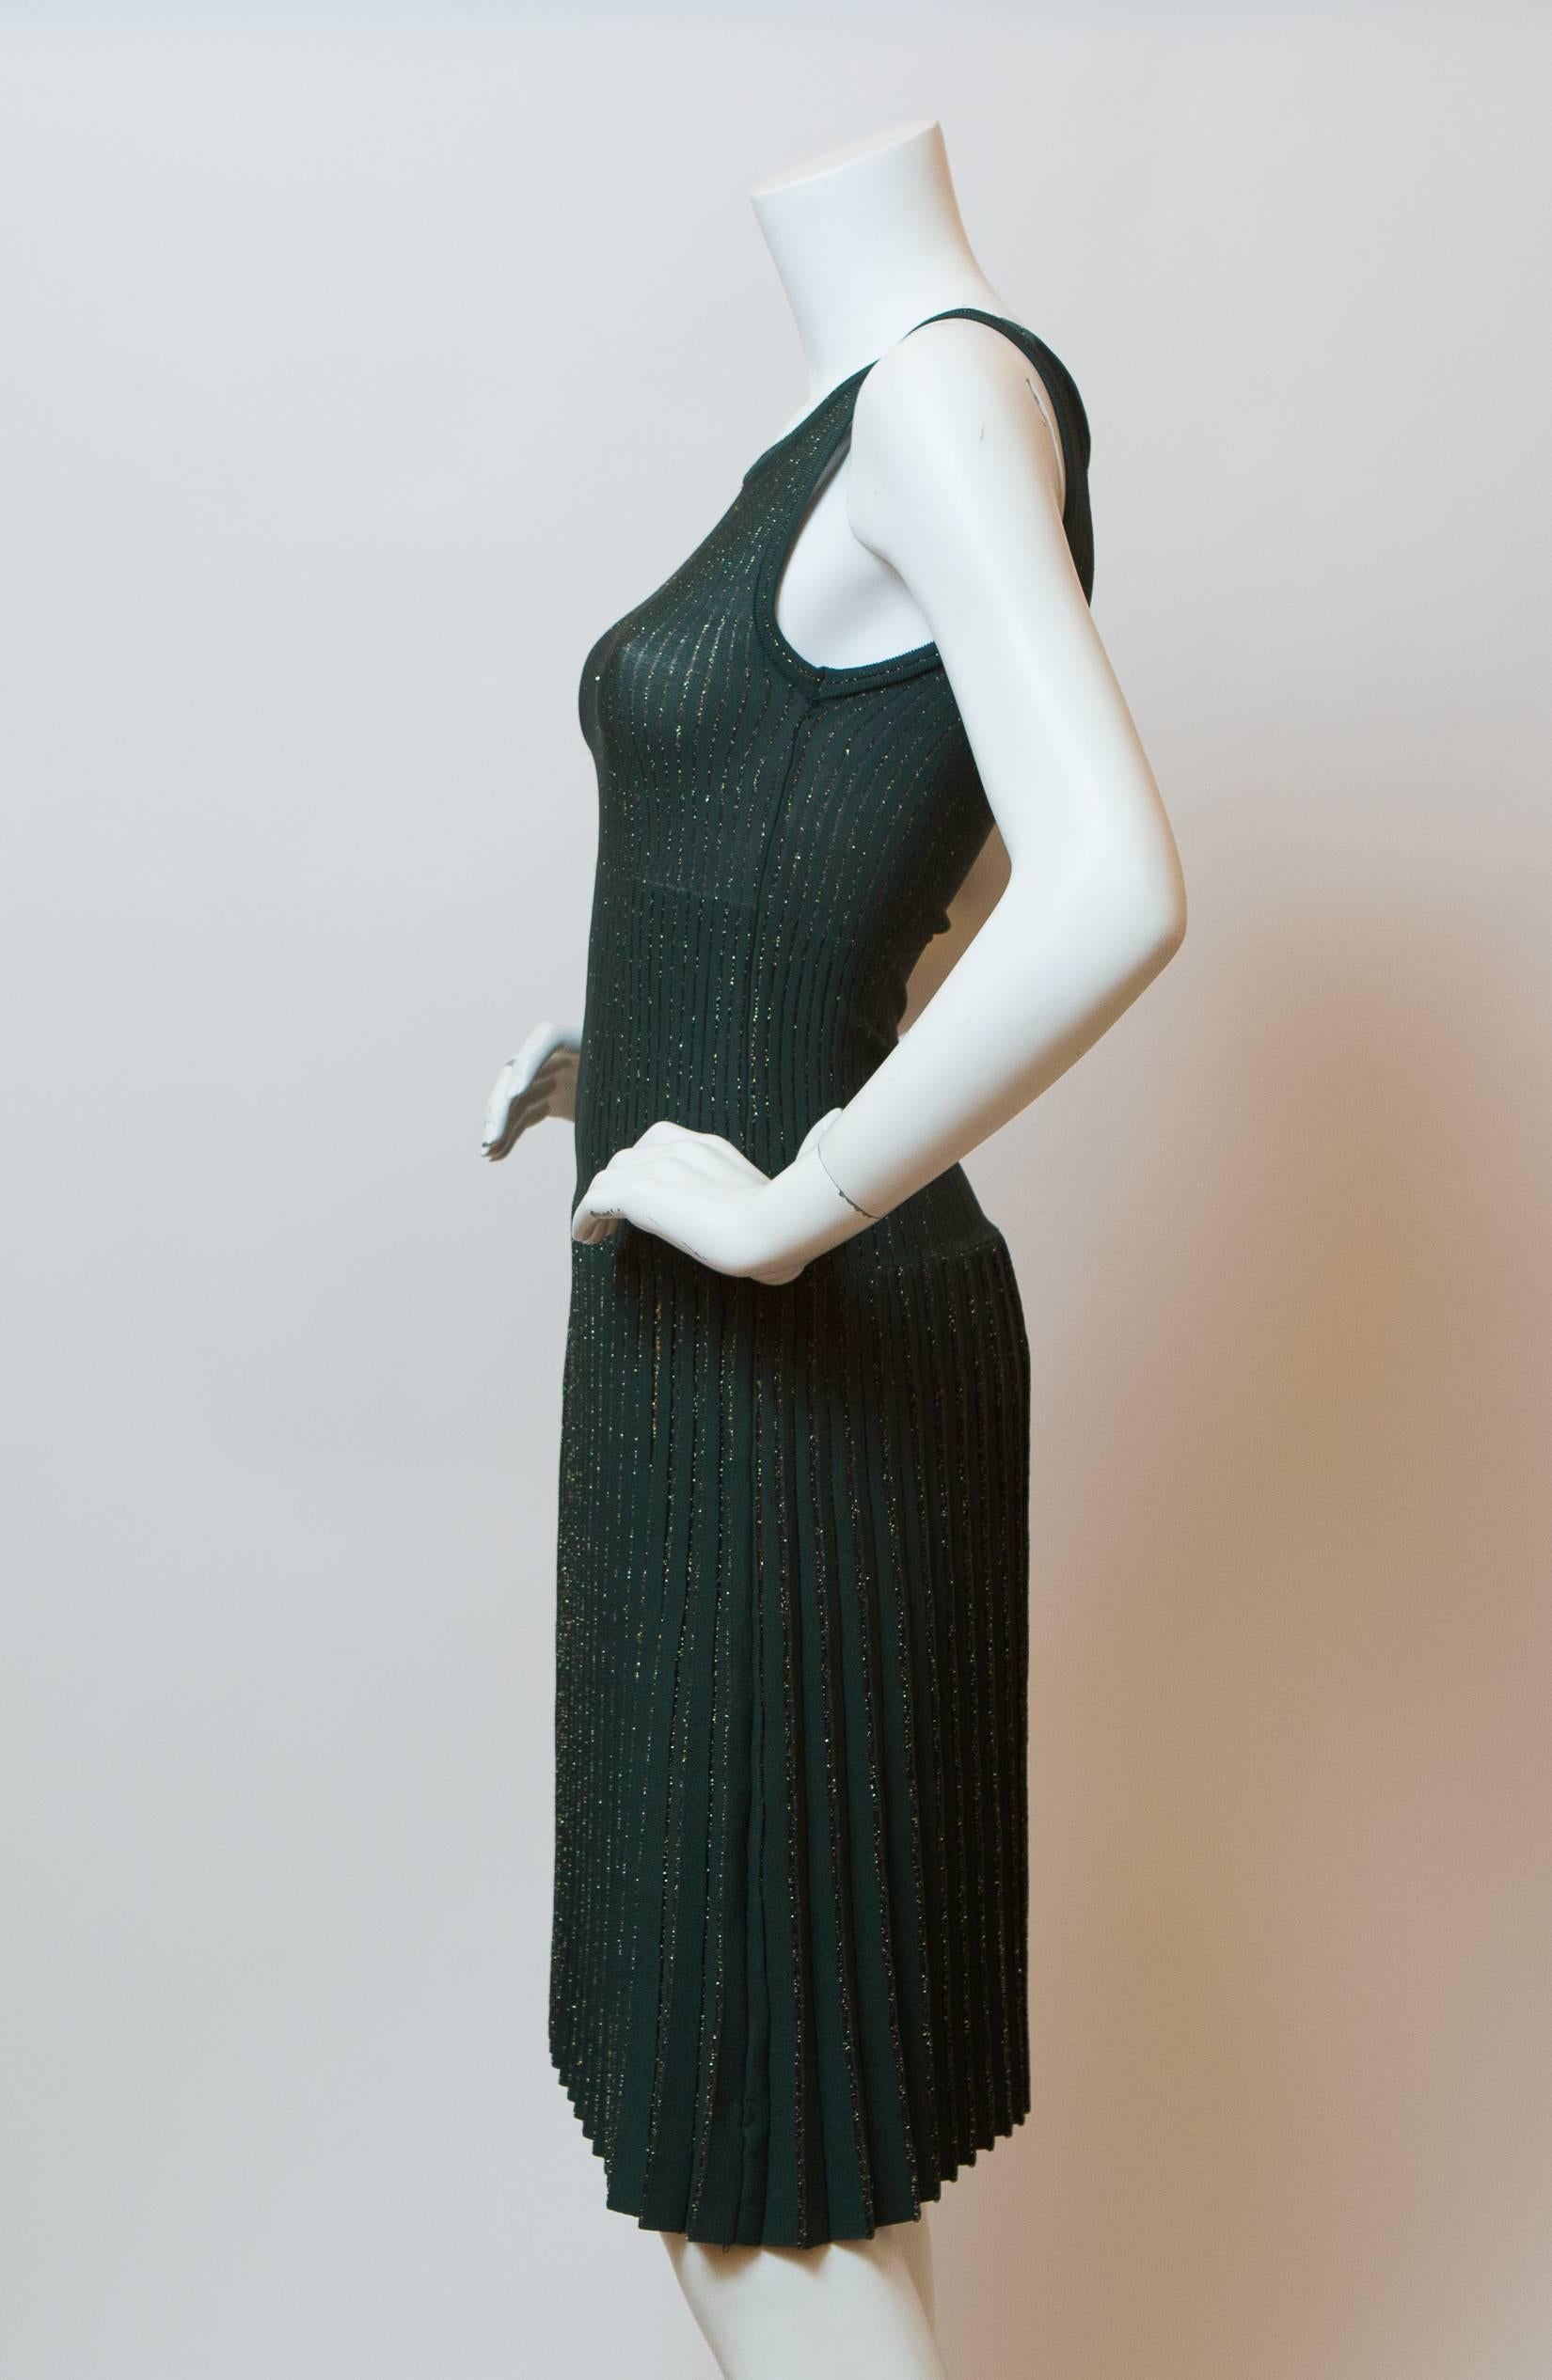 Alaia green knit with gold sparkle, sleeveless, pleated dress.